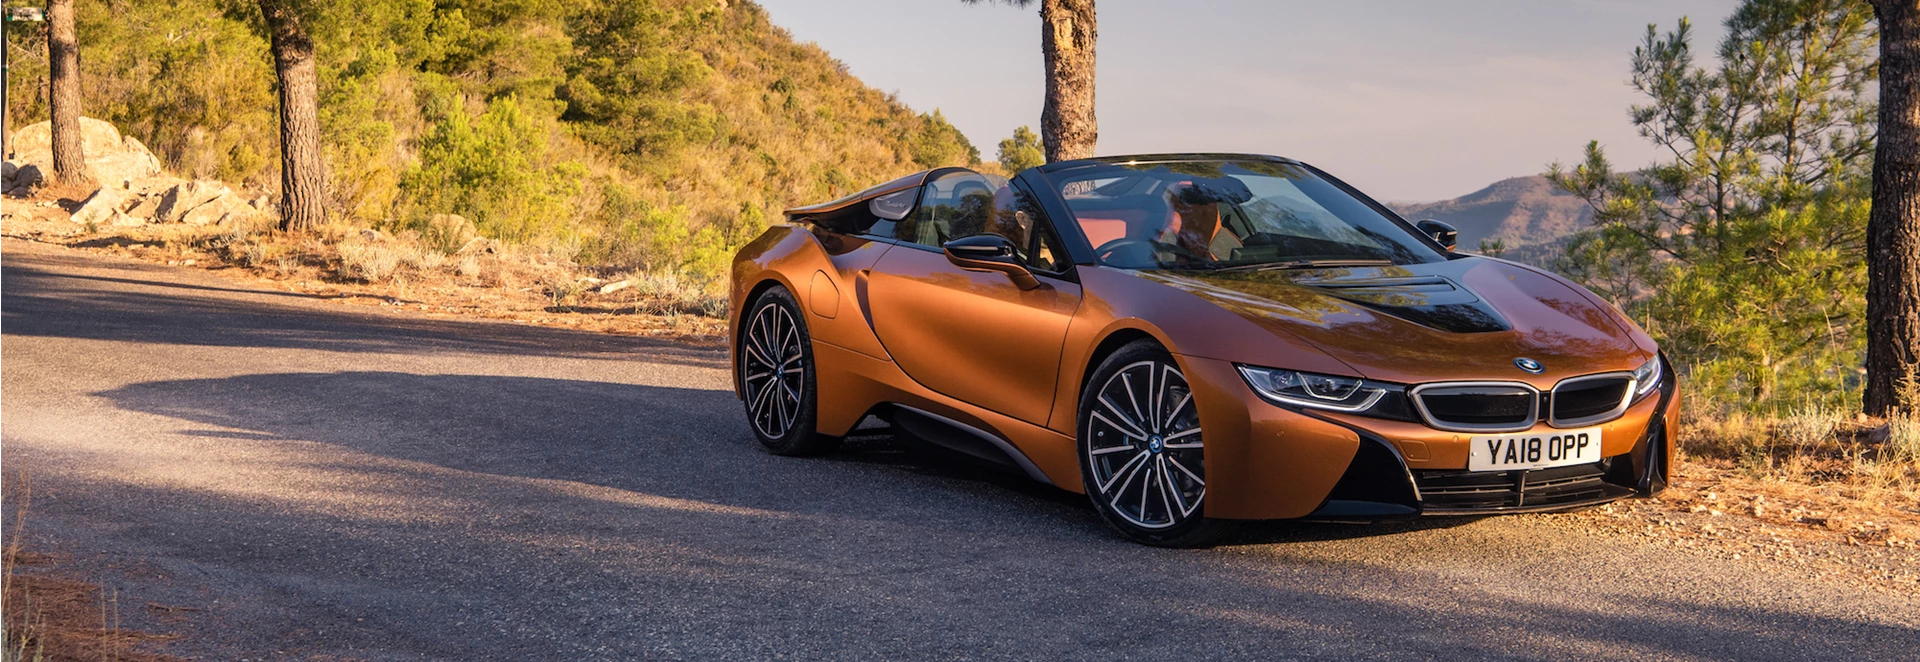 BMW i8 hybrid sports car to end production next month 